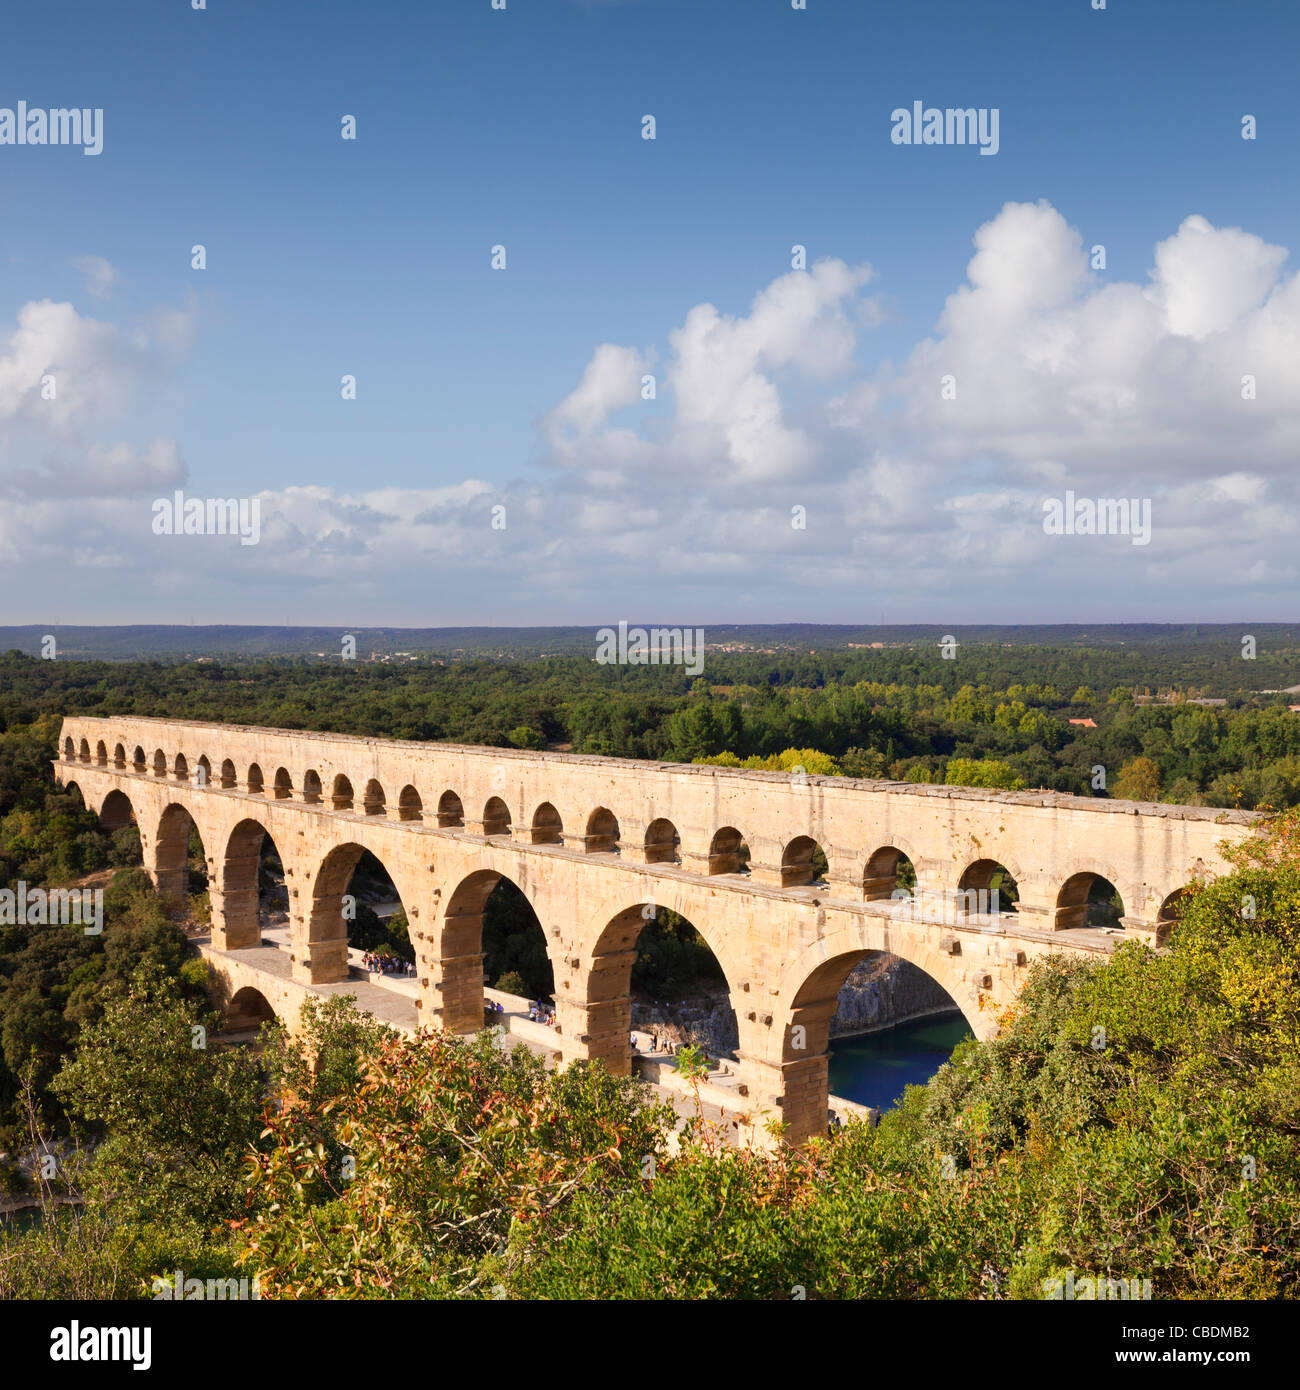 The Pont du Gard was built by the Romans in the first century AD, to carry water from Uzes to Nimes. Stock Photo